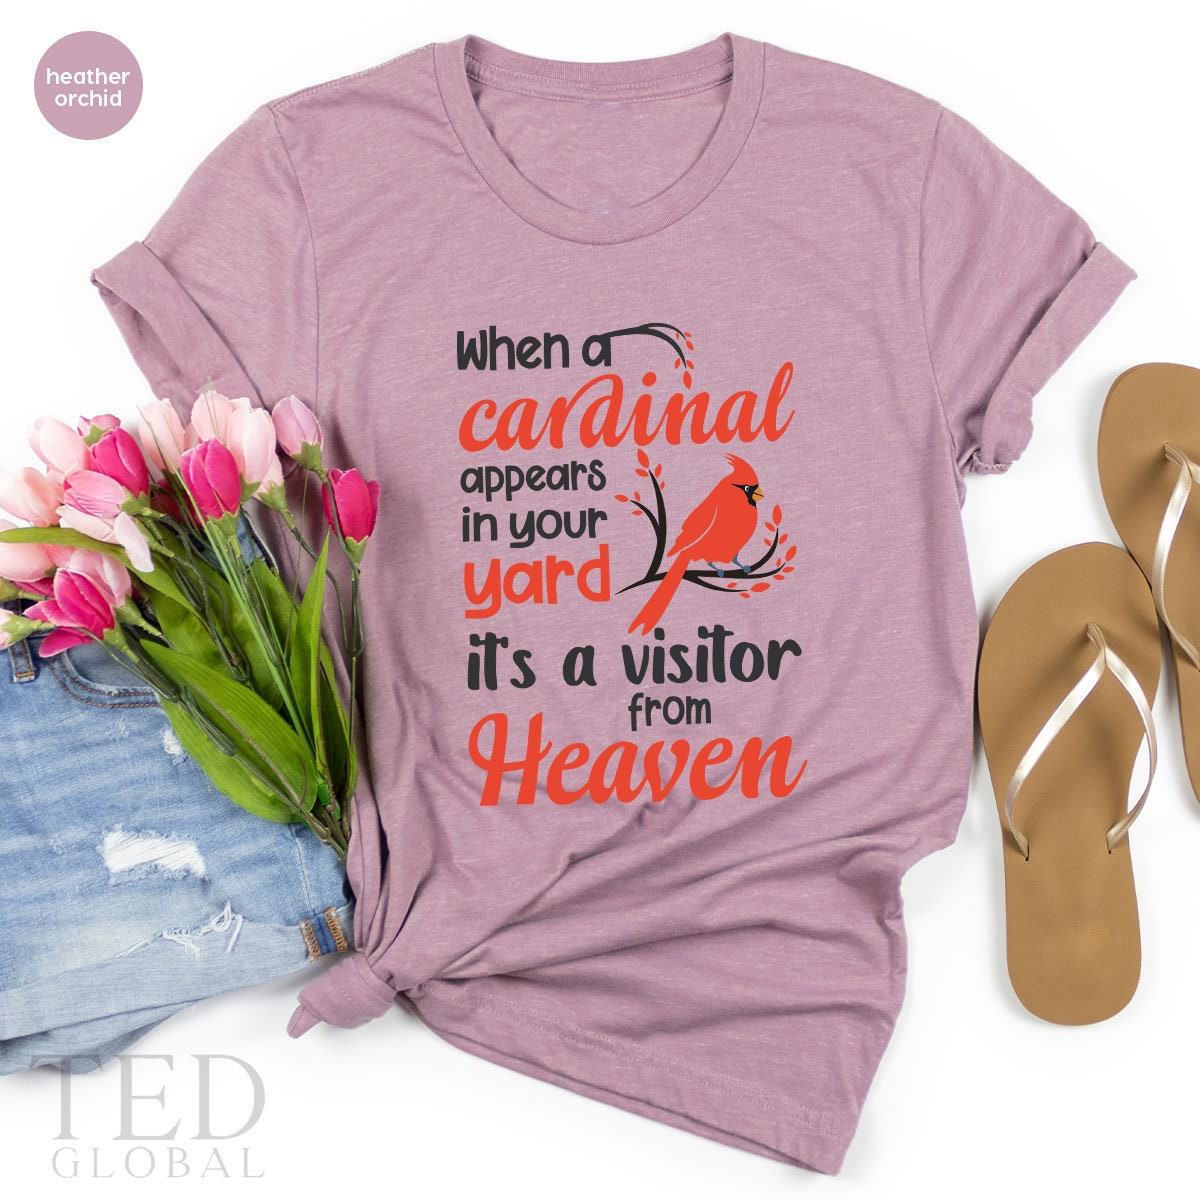 Cute Bird T-Shirt, When A Cardinal Appears In Your Yard Its A Visitor From HeavenT Shirt, Family Holiday Outfit Shirts, Christmas Gift - Fastdeliverytees.com